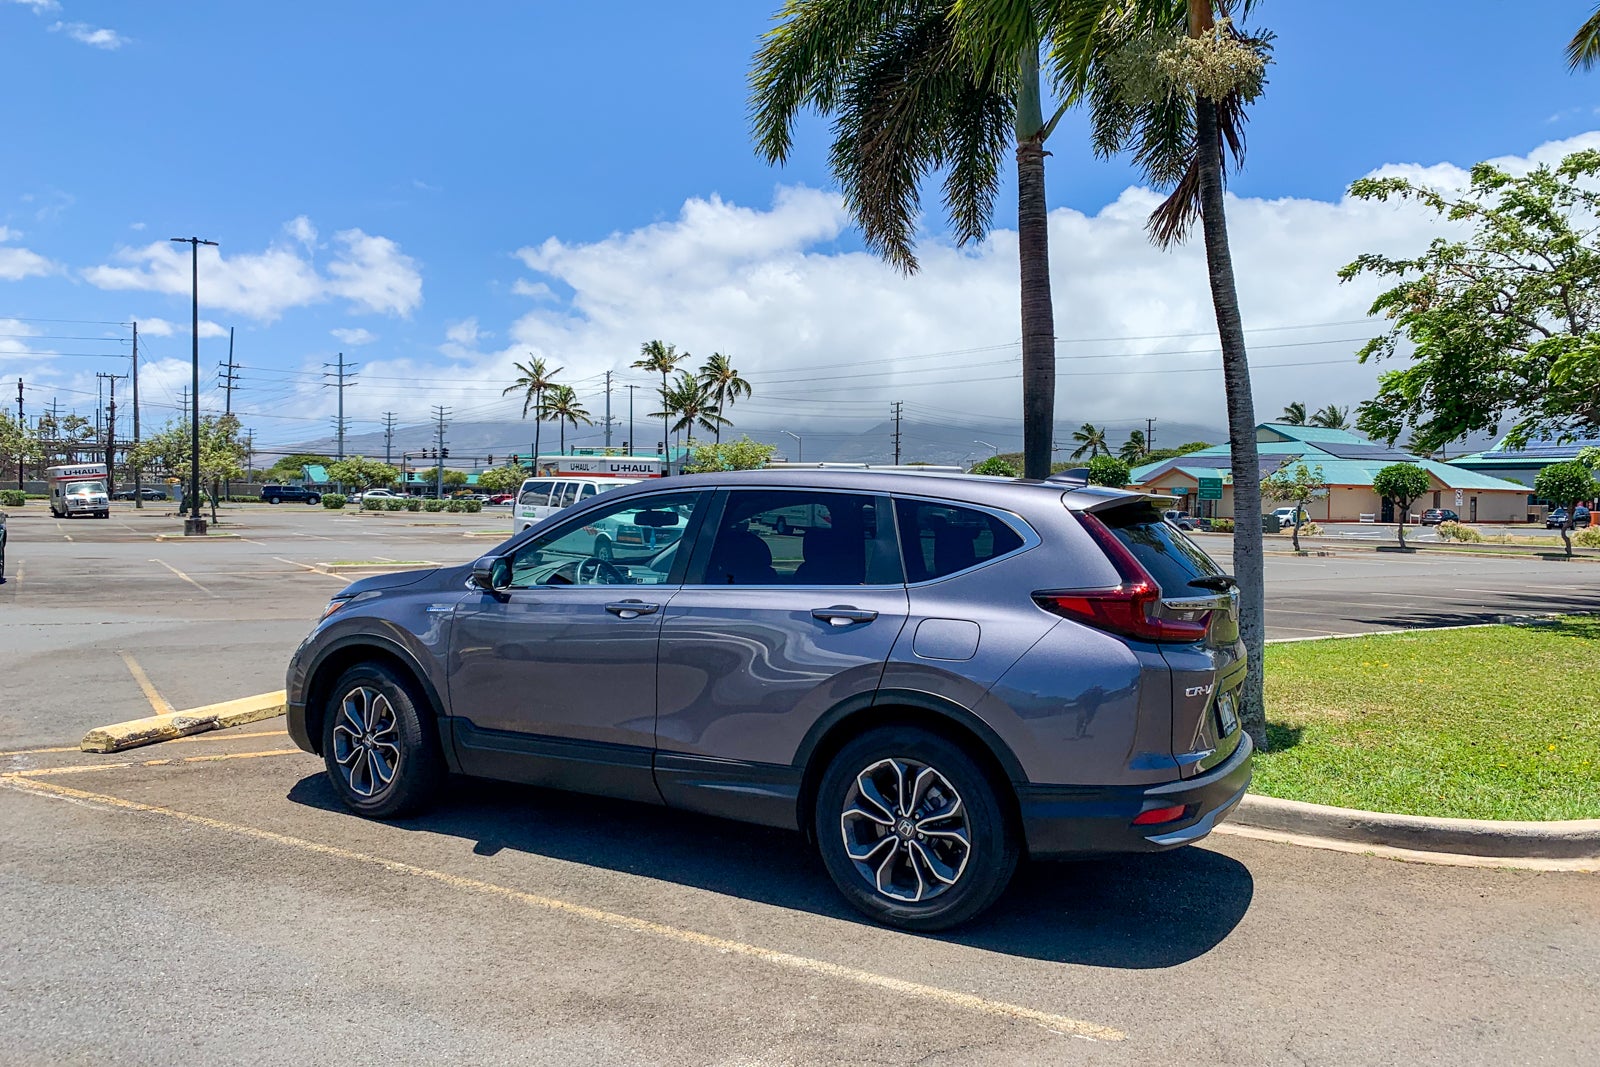 Renting a car in Hawaii with Turo during rental �apocalypse�